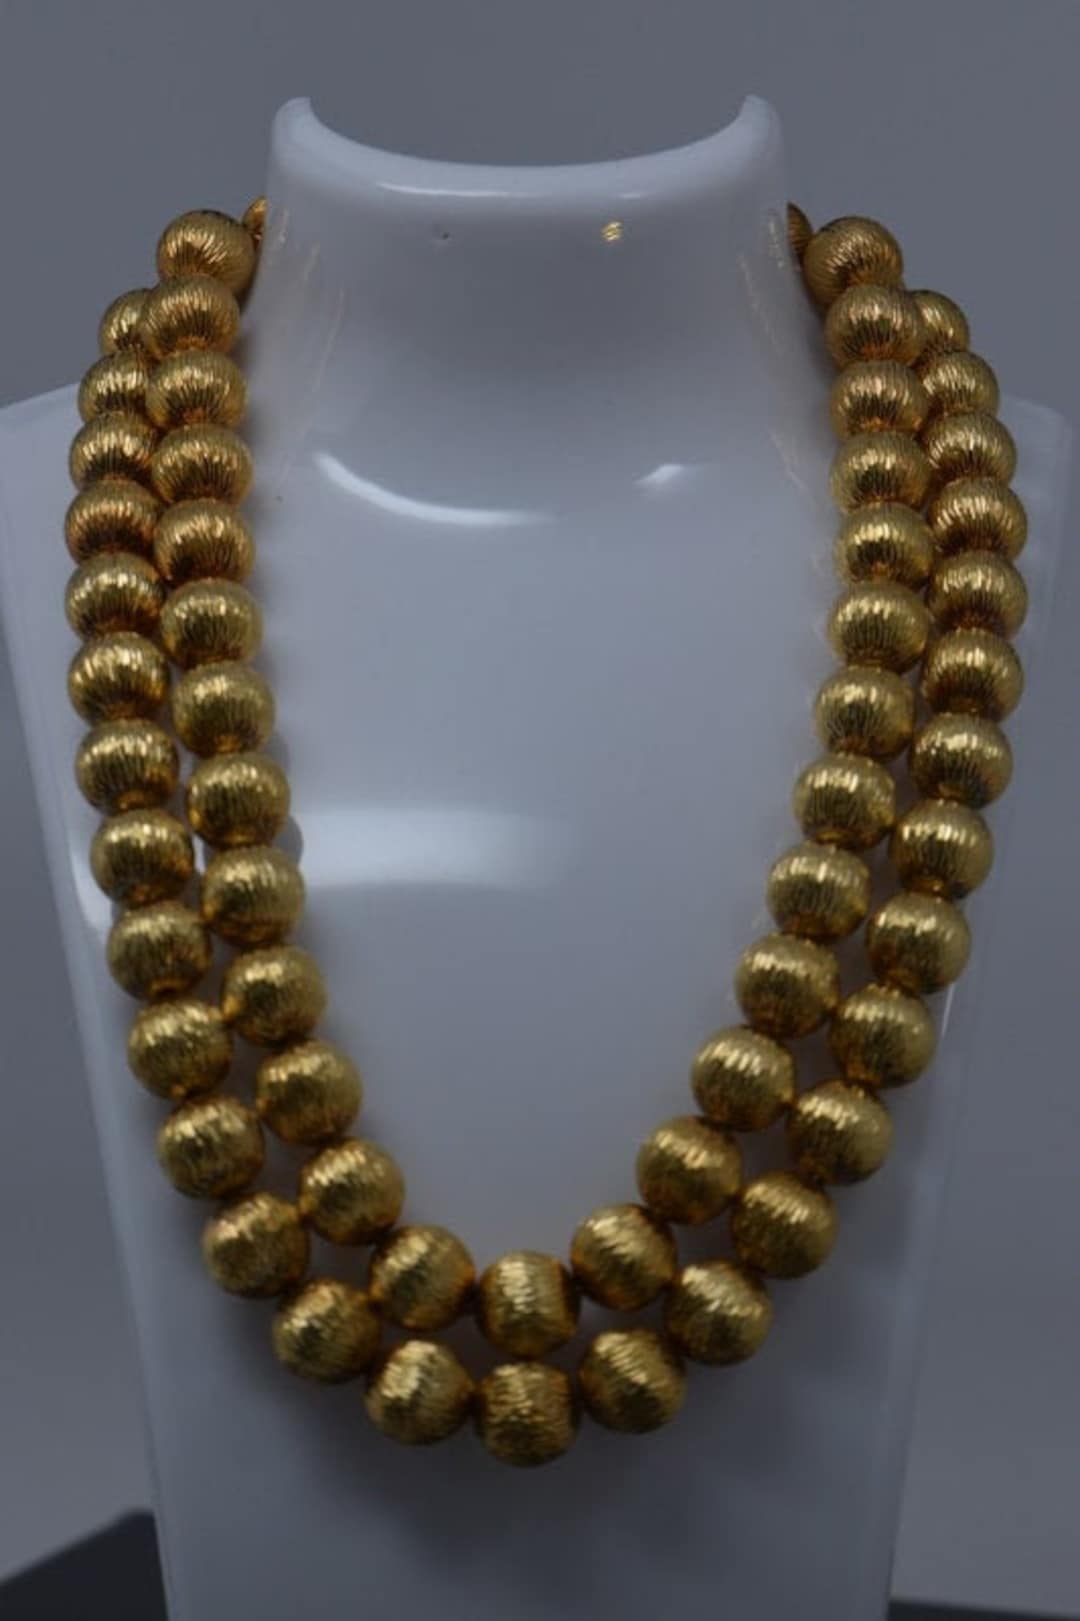 Double Strand Beaded Chain Necklace 14K Yellow Gold 17